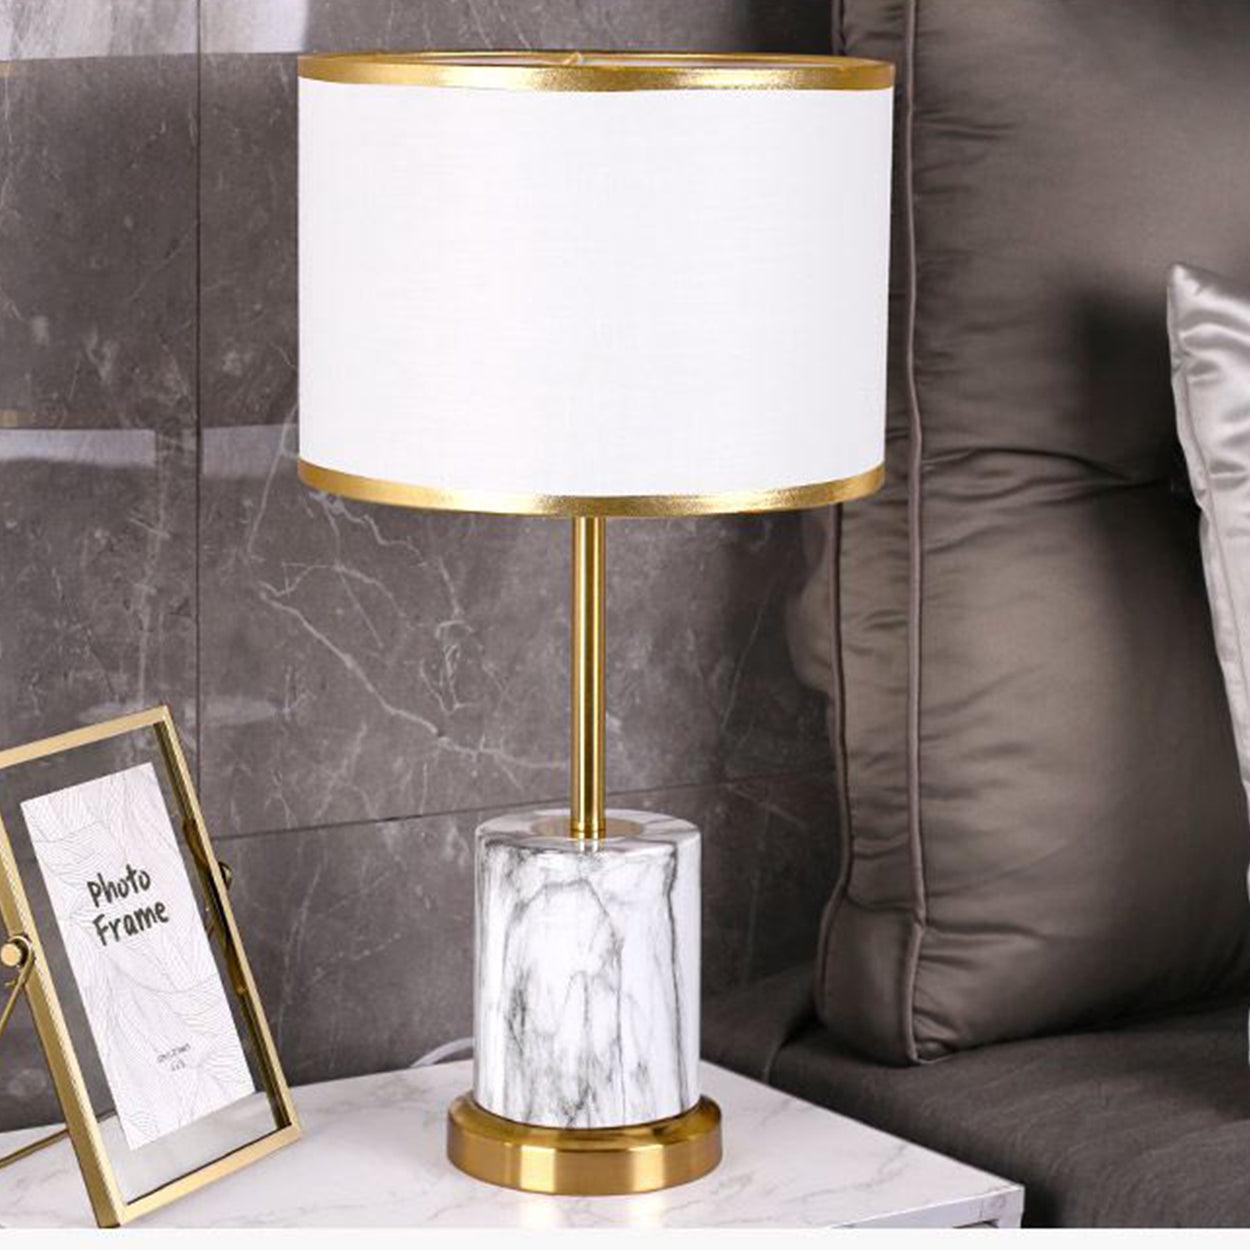 NERO GOLD WITH MARBLE TEXTURE TABLE LAMP BEDSIDE LAMP - Ankur Lighting